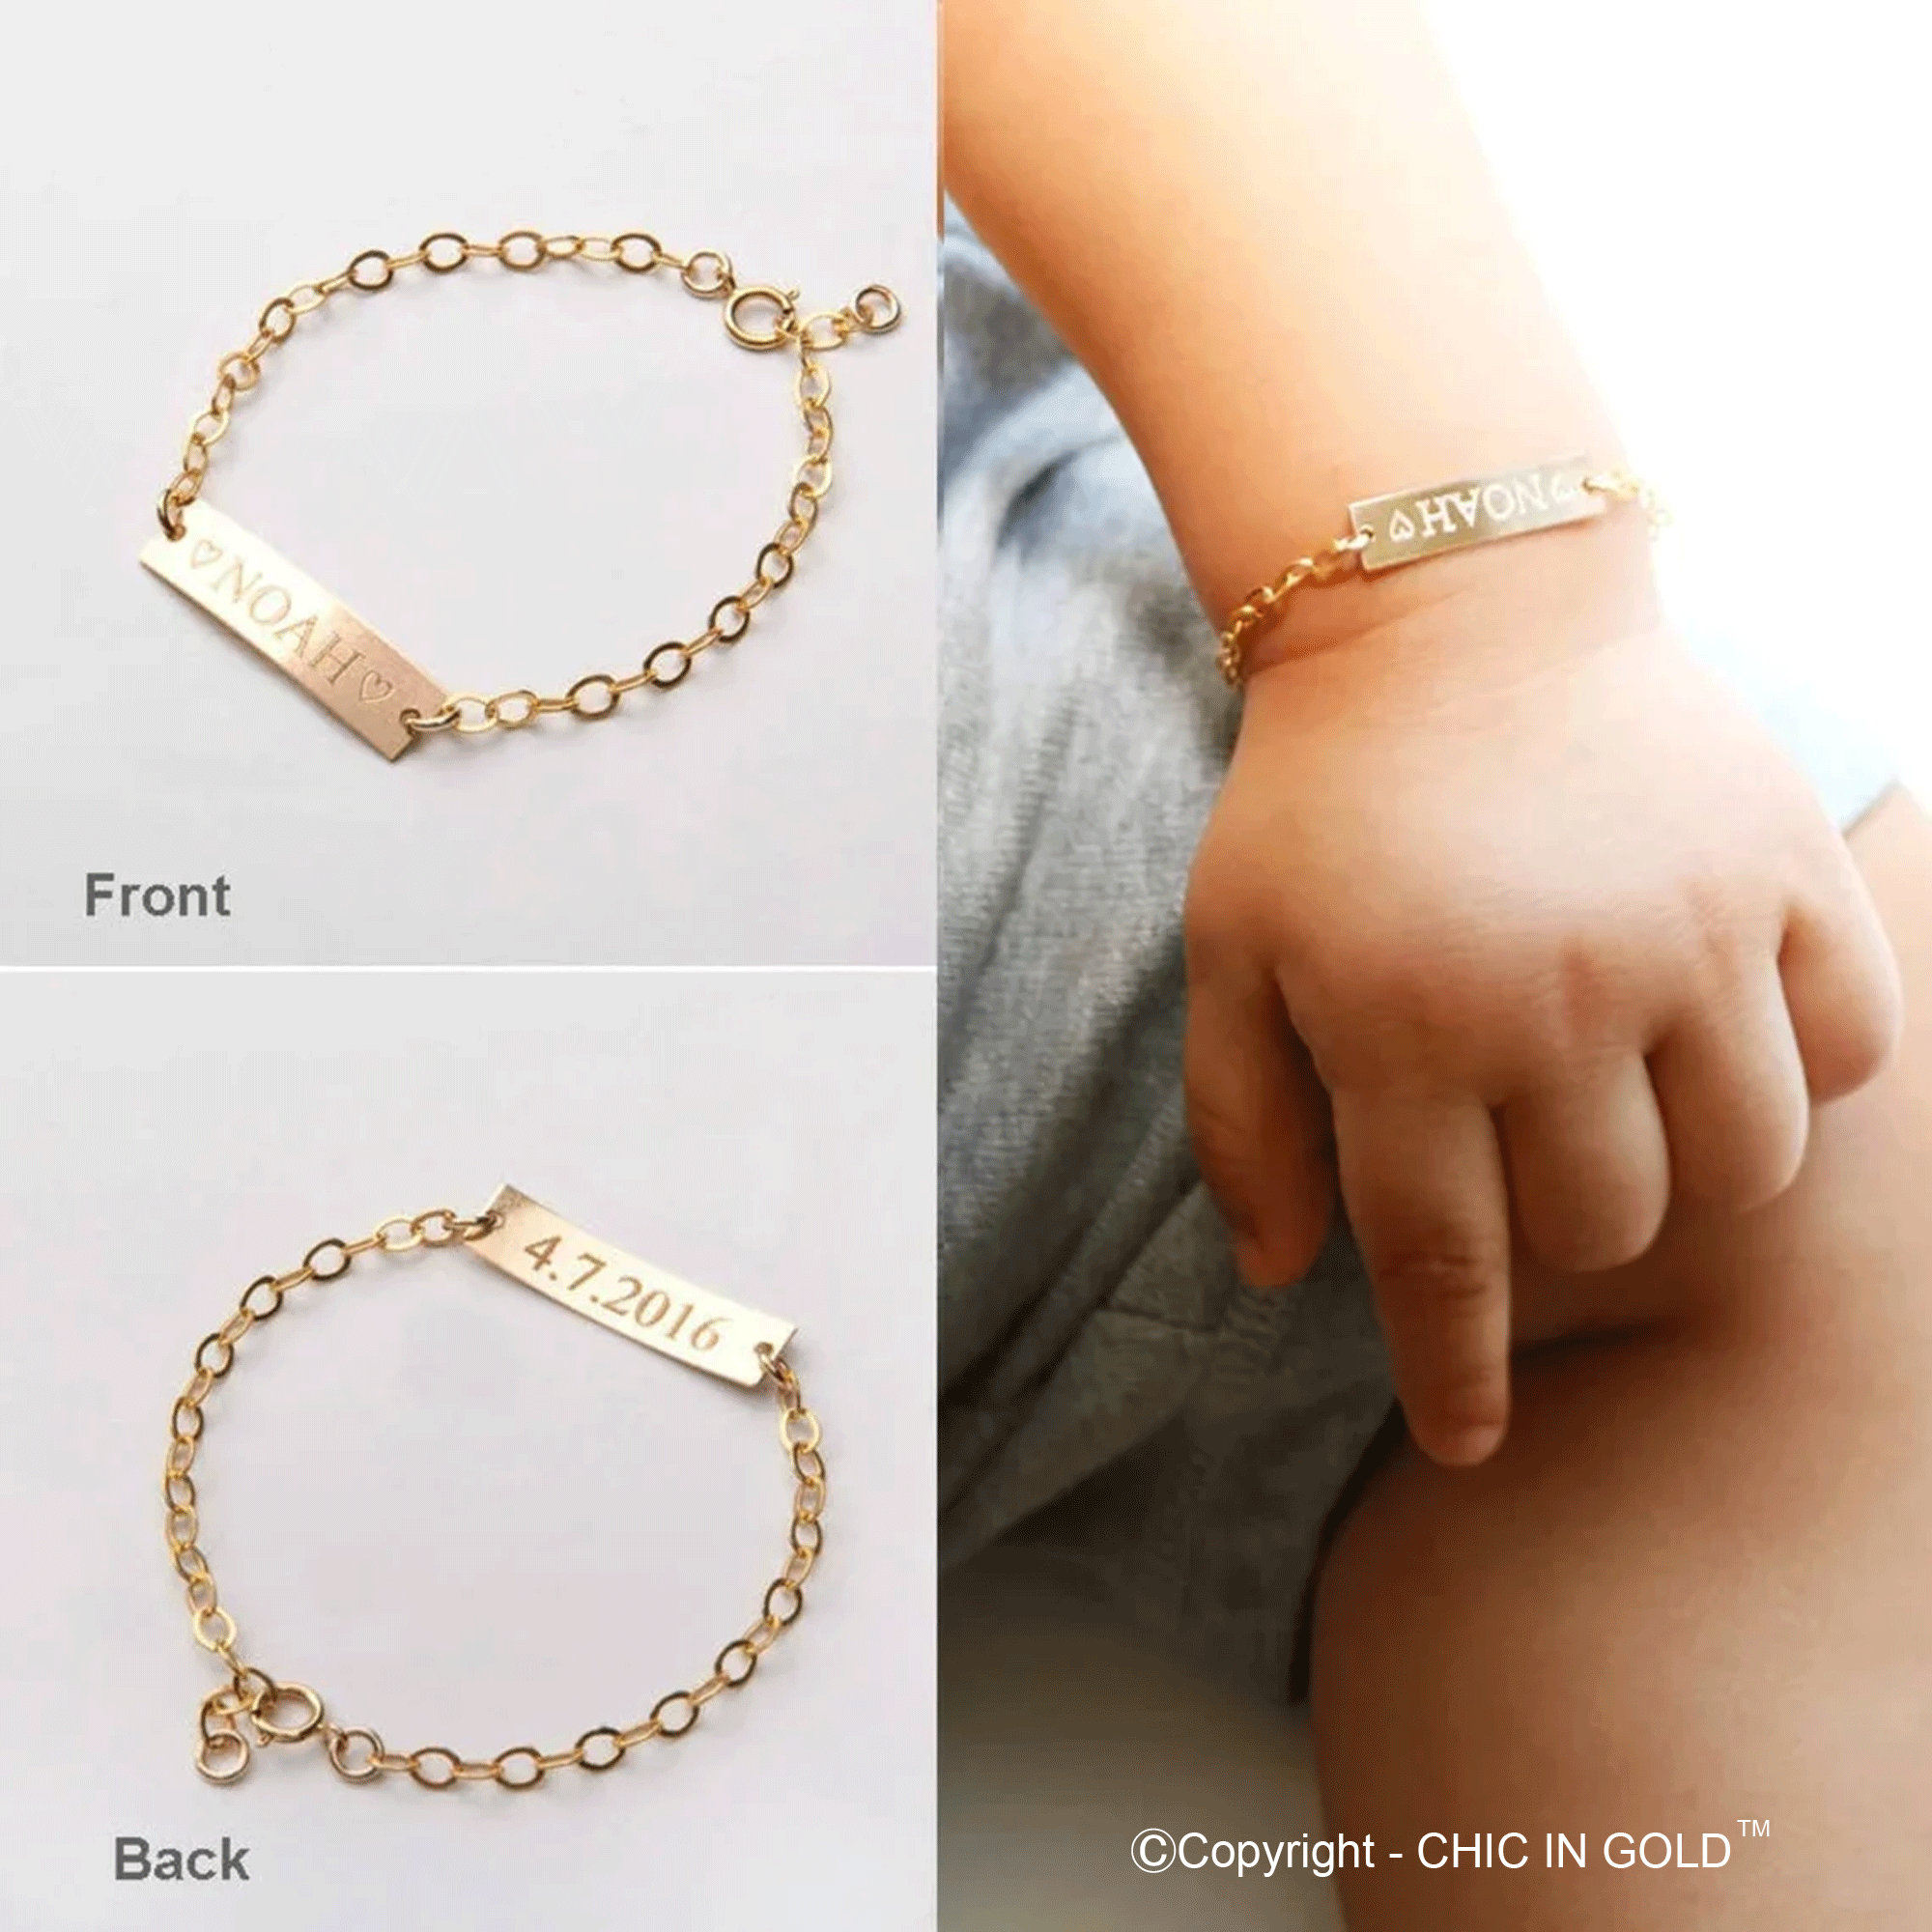 Crystal & Pearl Children's Baptism Bracelet with Cross Charm - Clothed with  Truth